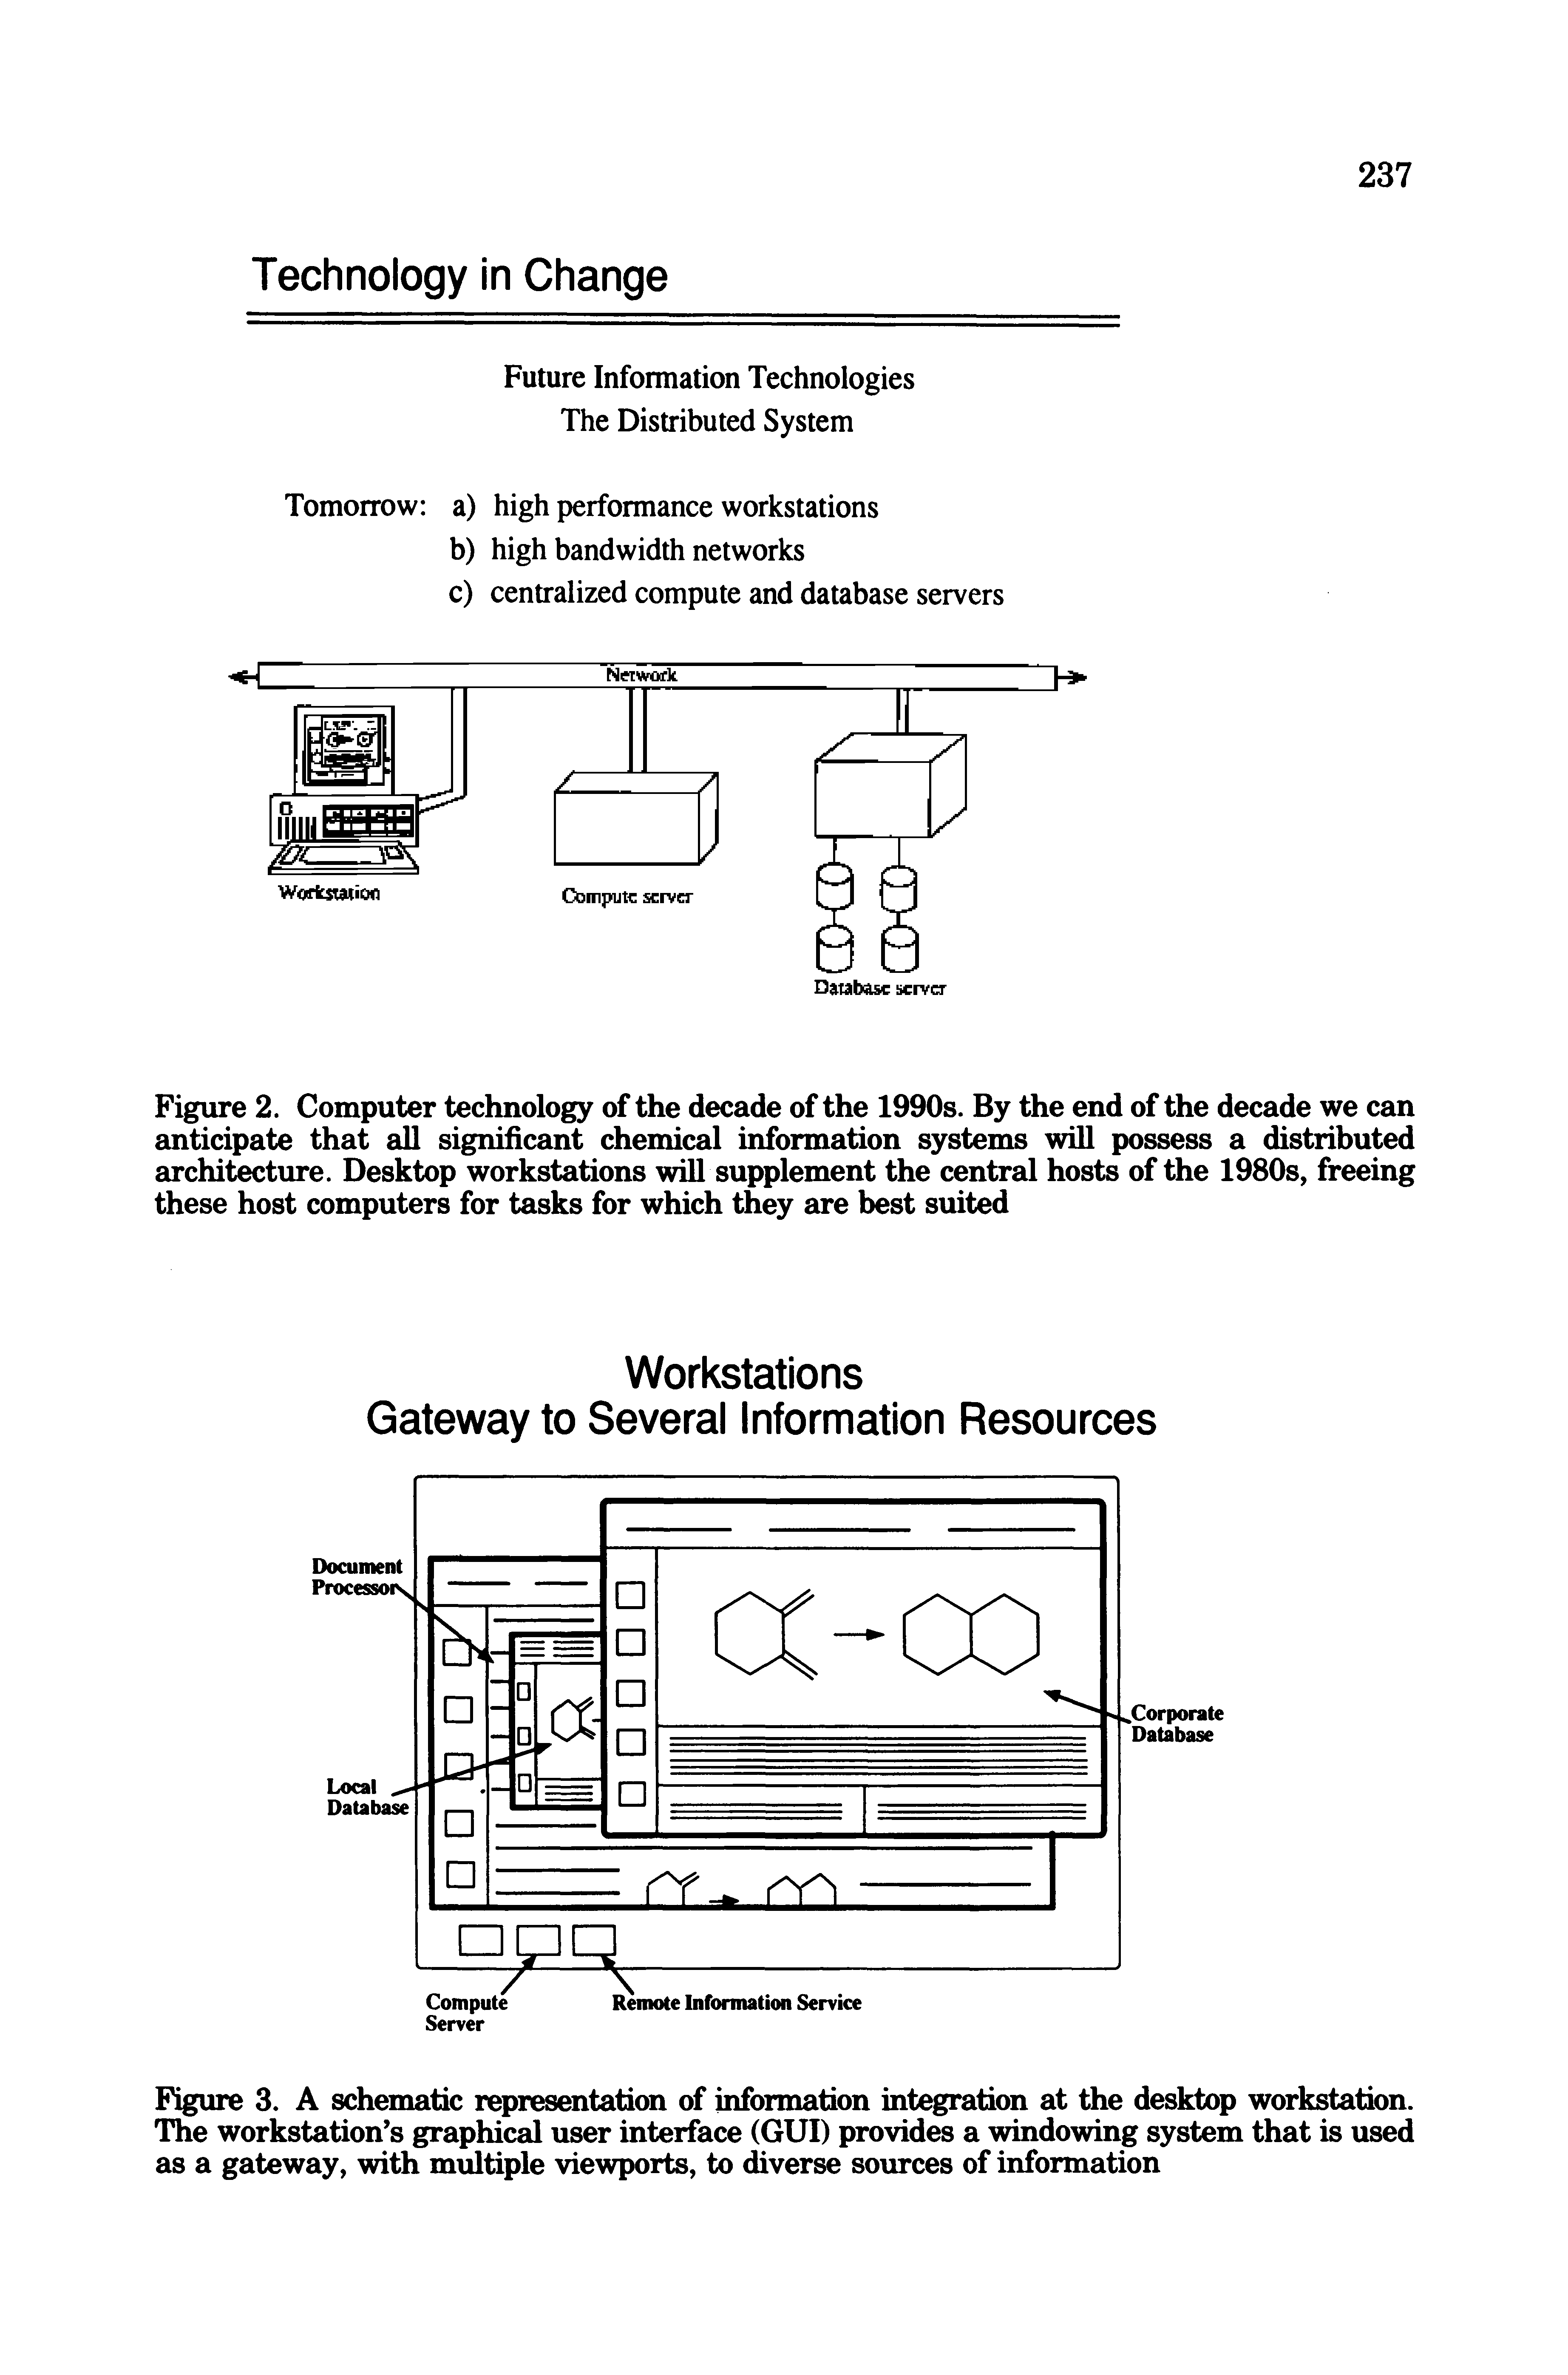 Figure 2. Computer technology of the decade of the 1990s. By the end of the decade we can anticipate that all significant chemical information systems will possess a distributed architecture. Desktop workstations will supplement the central hosts of the 1980s, freeing these host computers for tasks for which they are best suited...